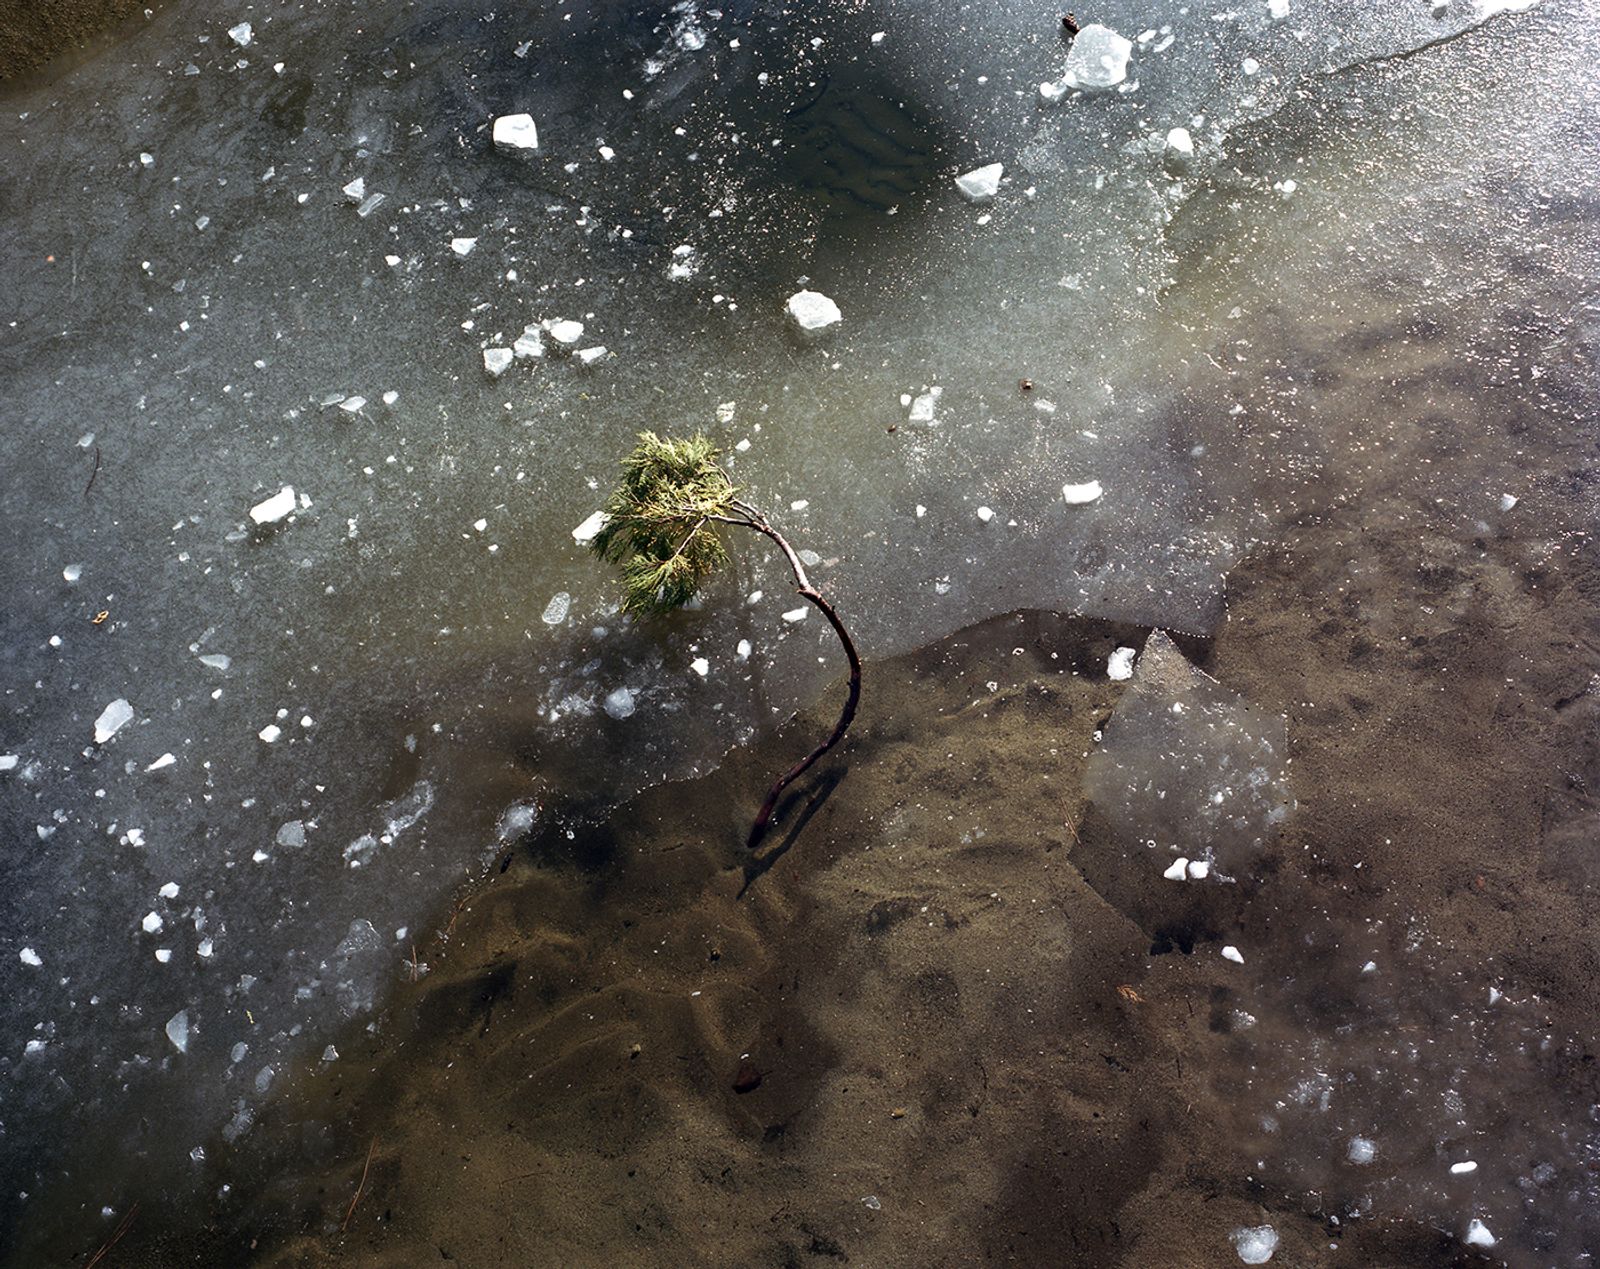 © Maya Meissner - Image from the The Cedar Lodge photography project